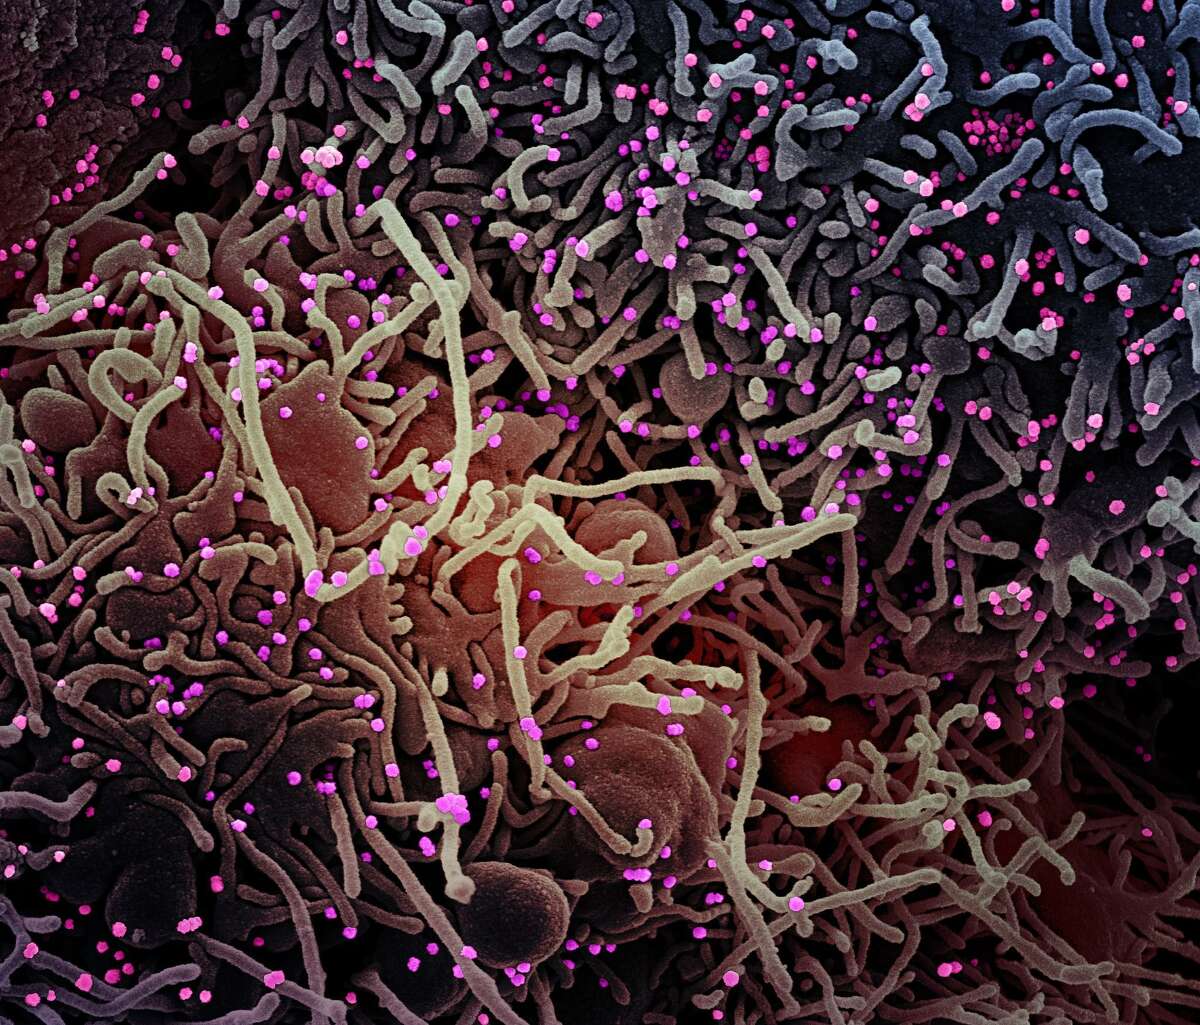 Colorized scanning electron micrograph of a cell after infection with SARS-COV-2 virus particles, which were isolated from a patient sample. Image captured at the NIAID Integrated Research Facility in Fort Detrick, Maryland.